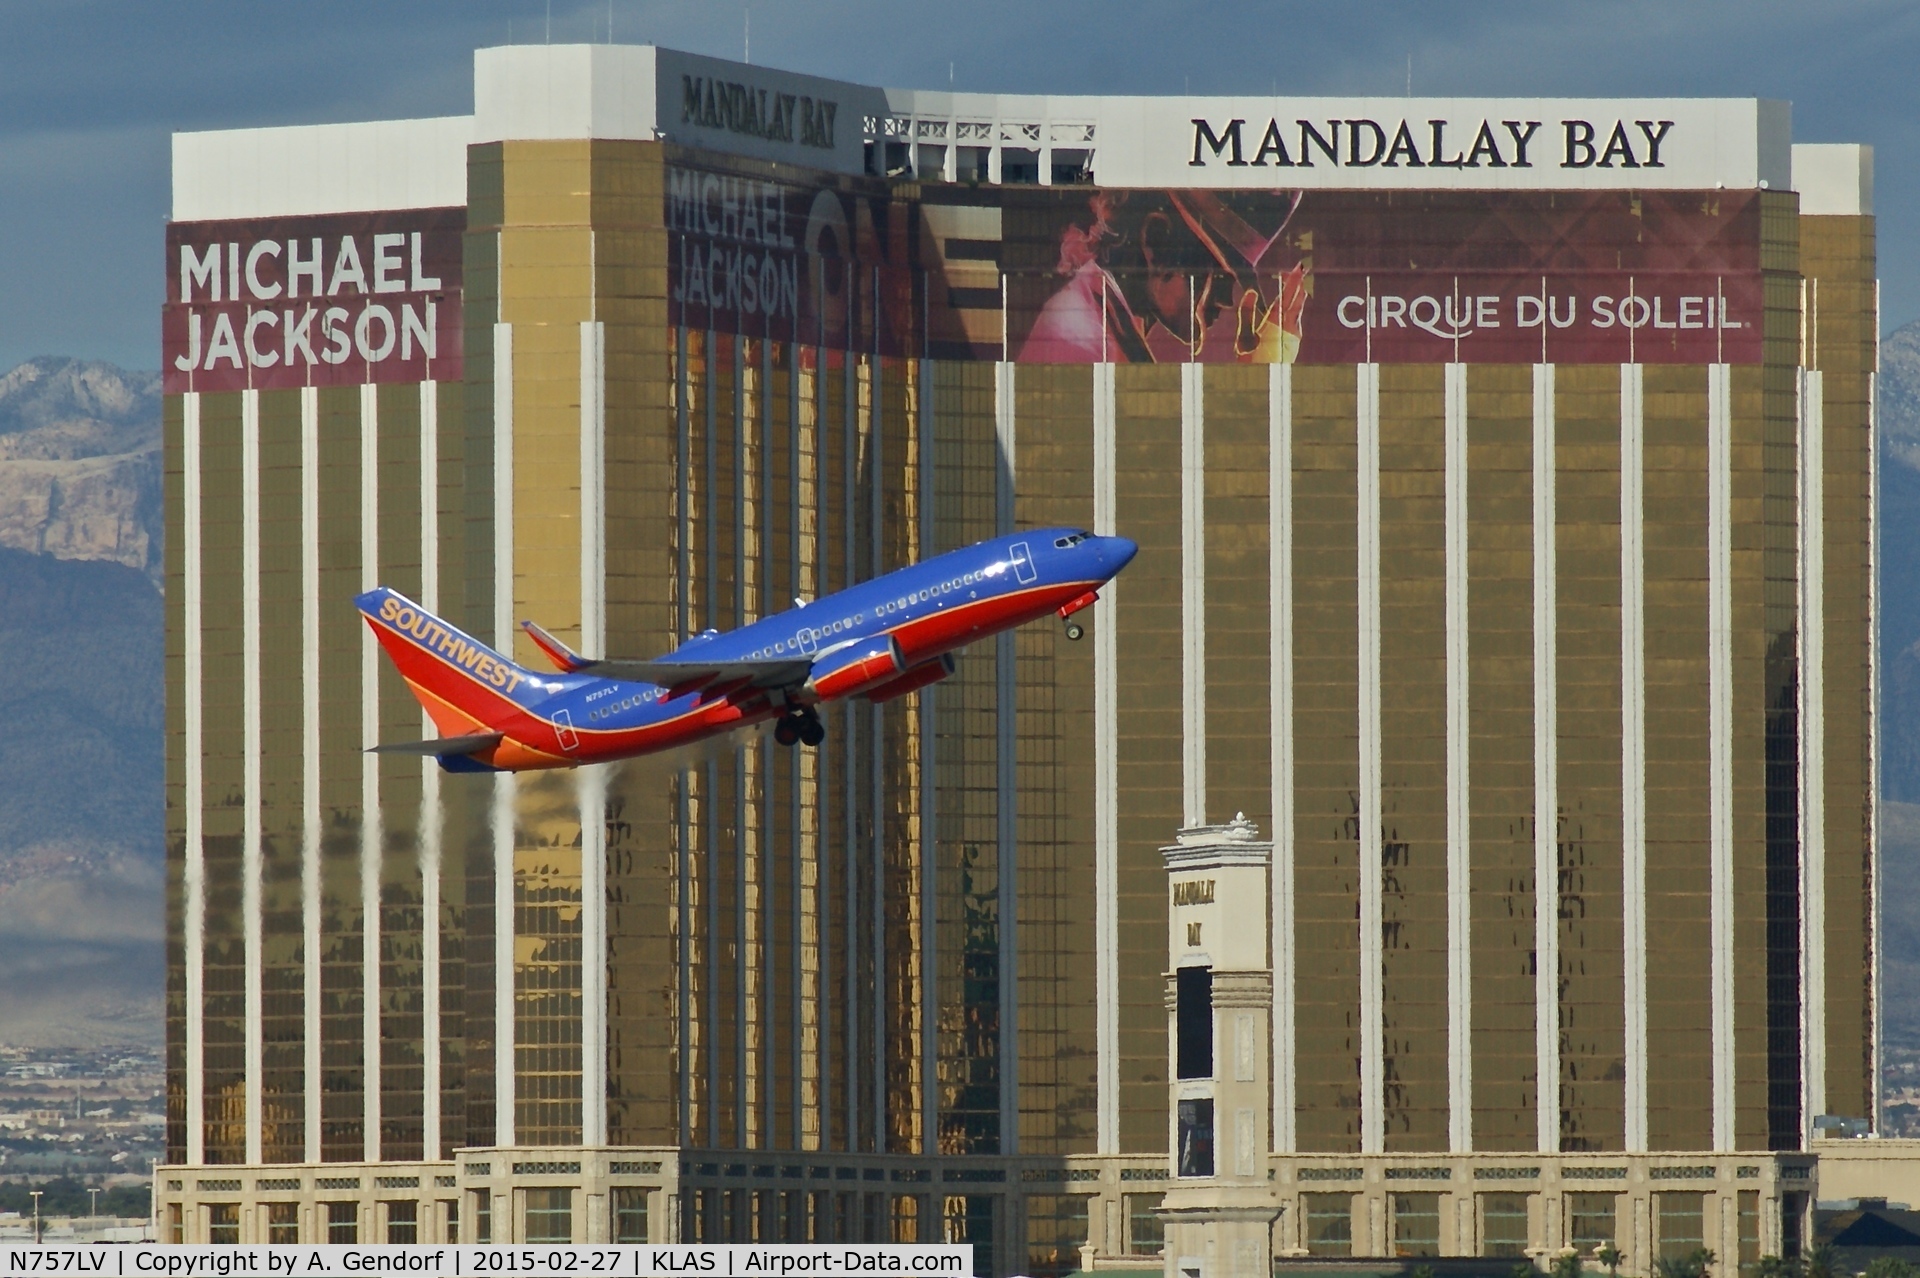 N757LV, 1999 Boeing 737-7H4 C/N 29850, Southwest Airlines, is here climbing out Las Vegas(KLAS) in front of the Mandalay Bay Hotel